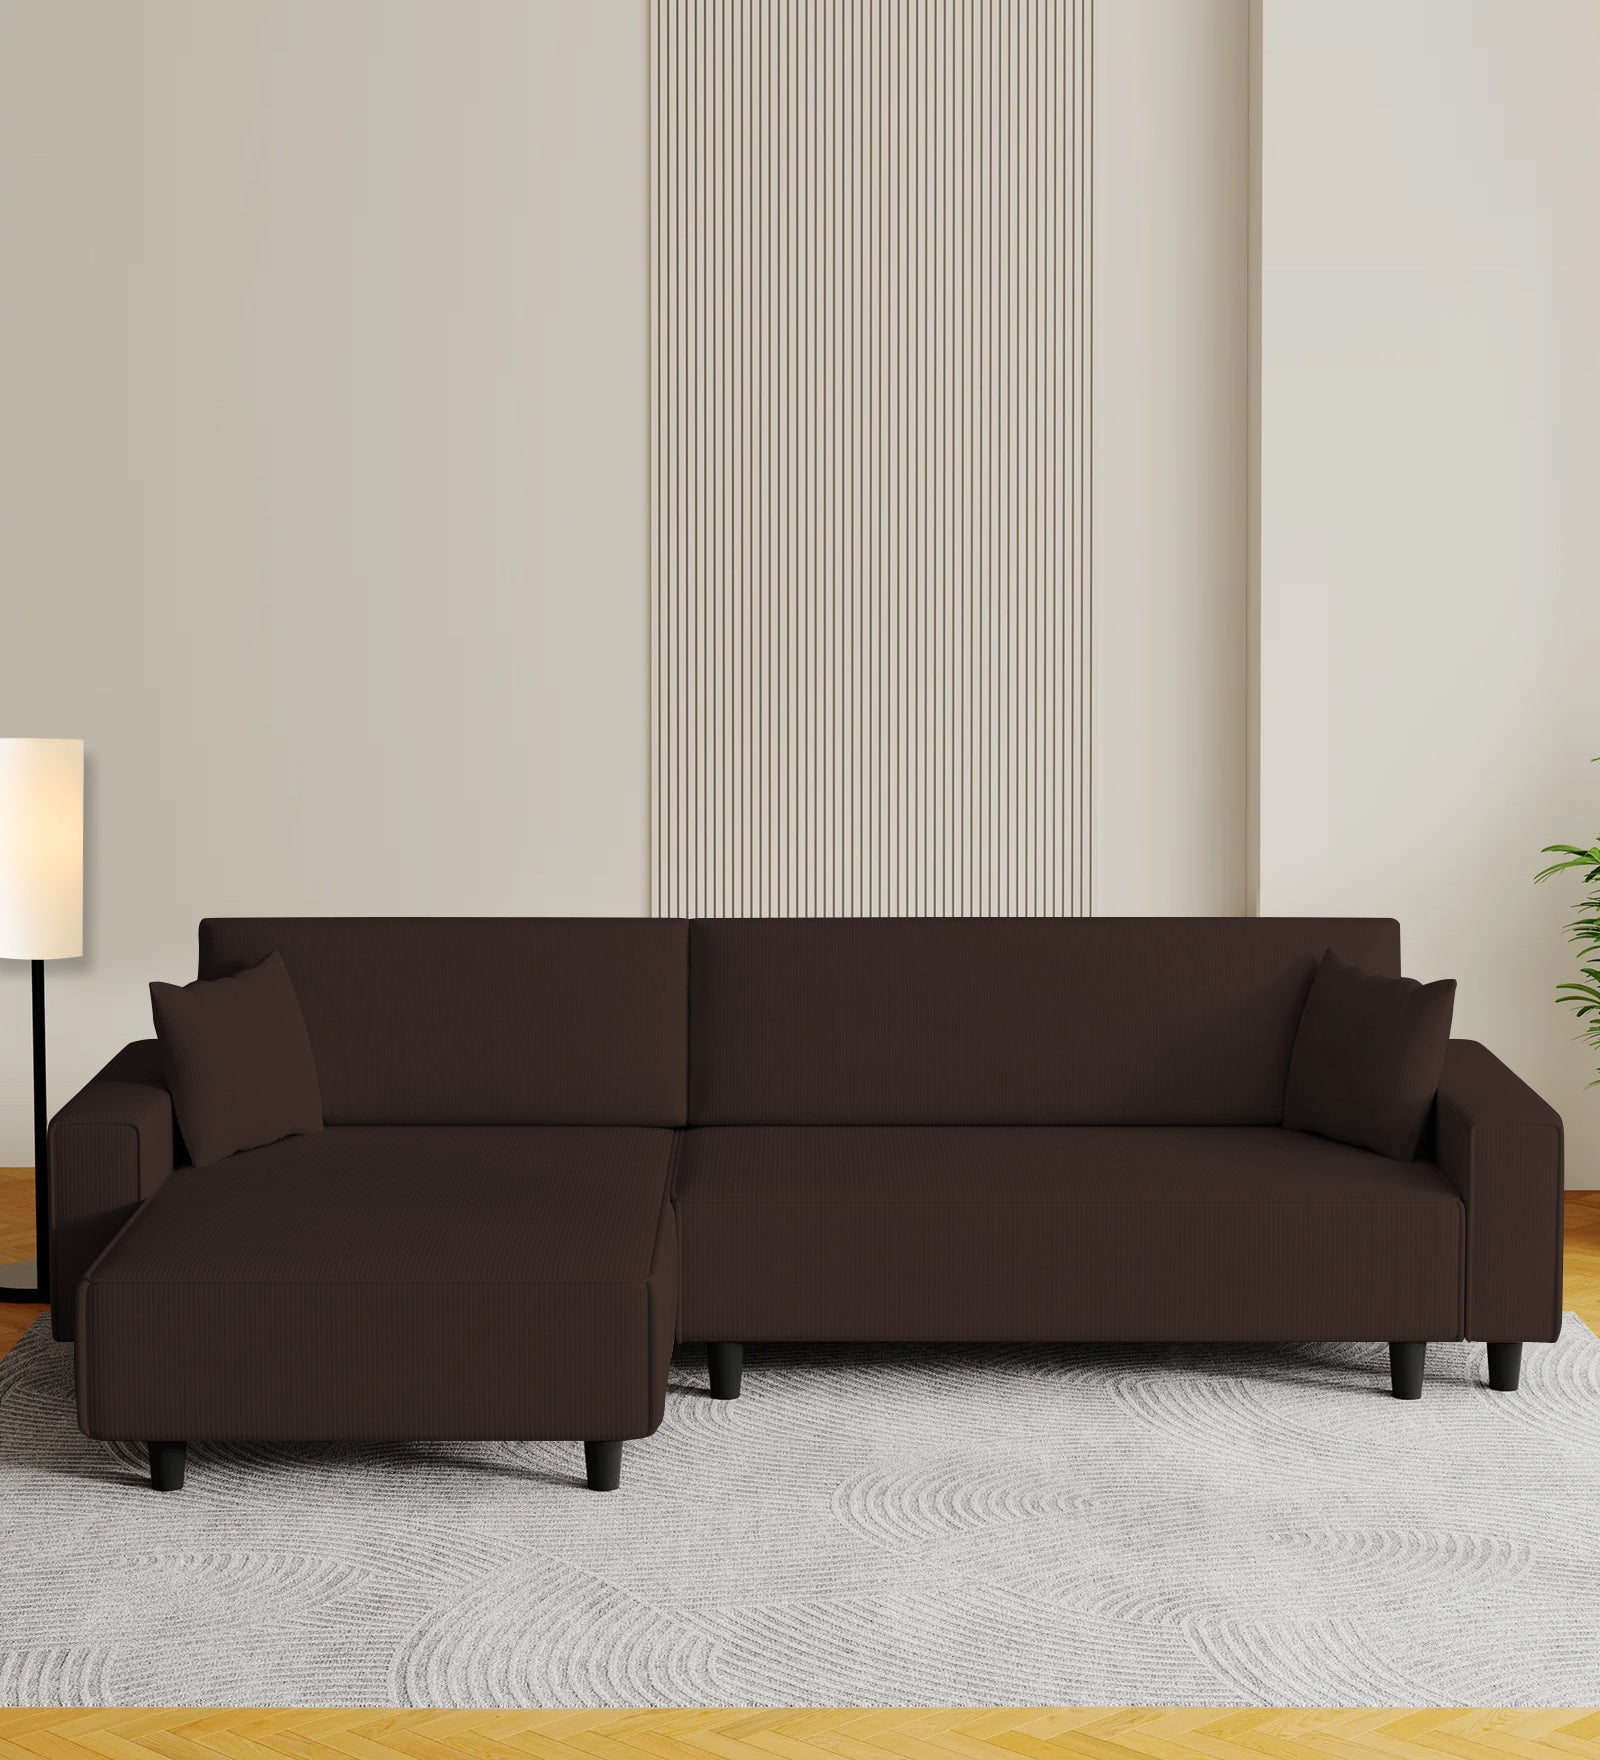 Peach Fabric RHS 6 Seater Sectional Sofa Cum Bed With Storage In Coffee Brown Colour